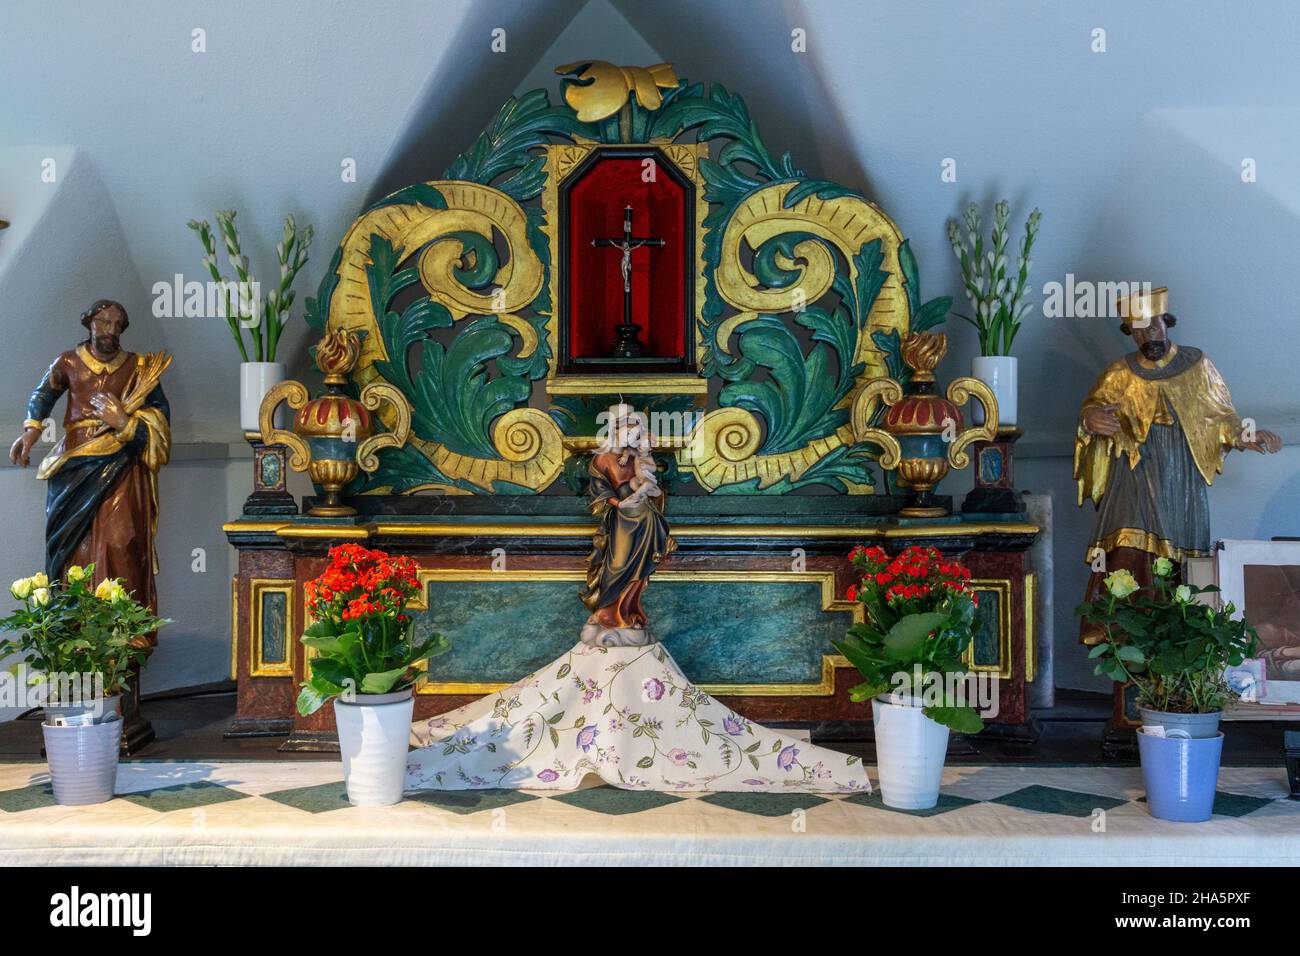 germany,monheim am rhein,bergisches land,niederbergisches land,niederberg,rhineland,north rhine-westphalia,nrw,chapel at the former vogtshof,st. josef chapel,interior view,altar,crucifix,mary with the baby jesus,figures of saints,floral decorations Stock Photo